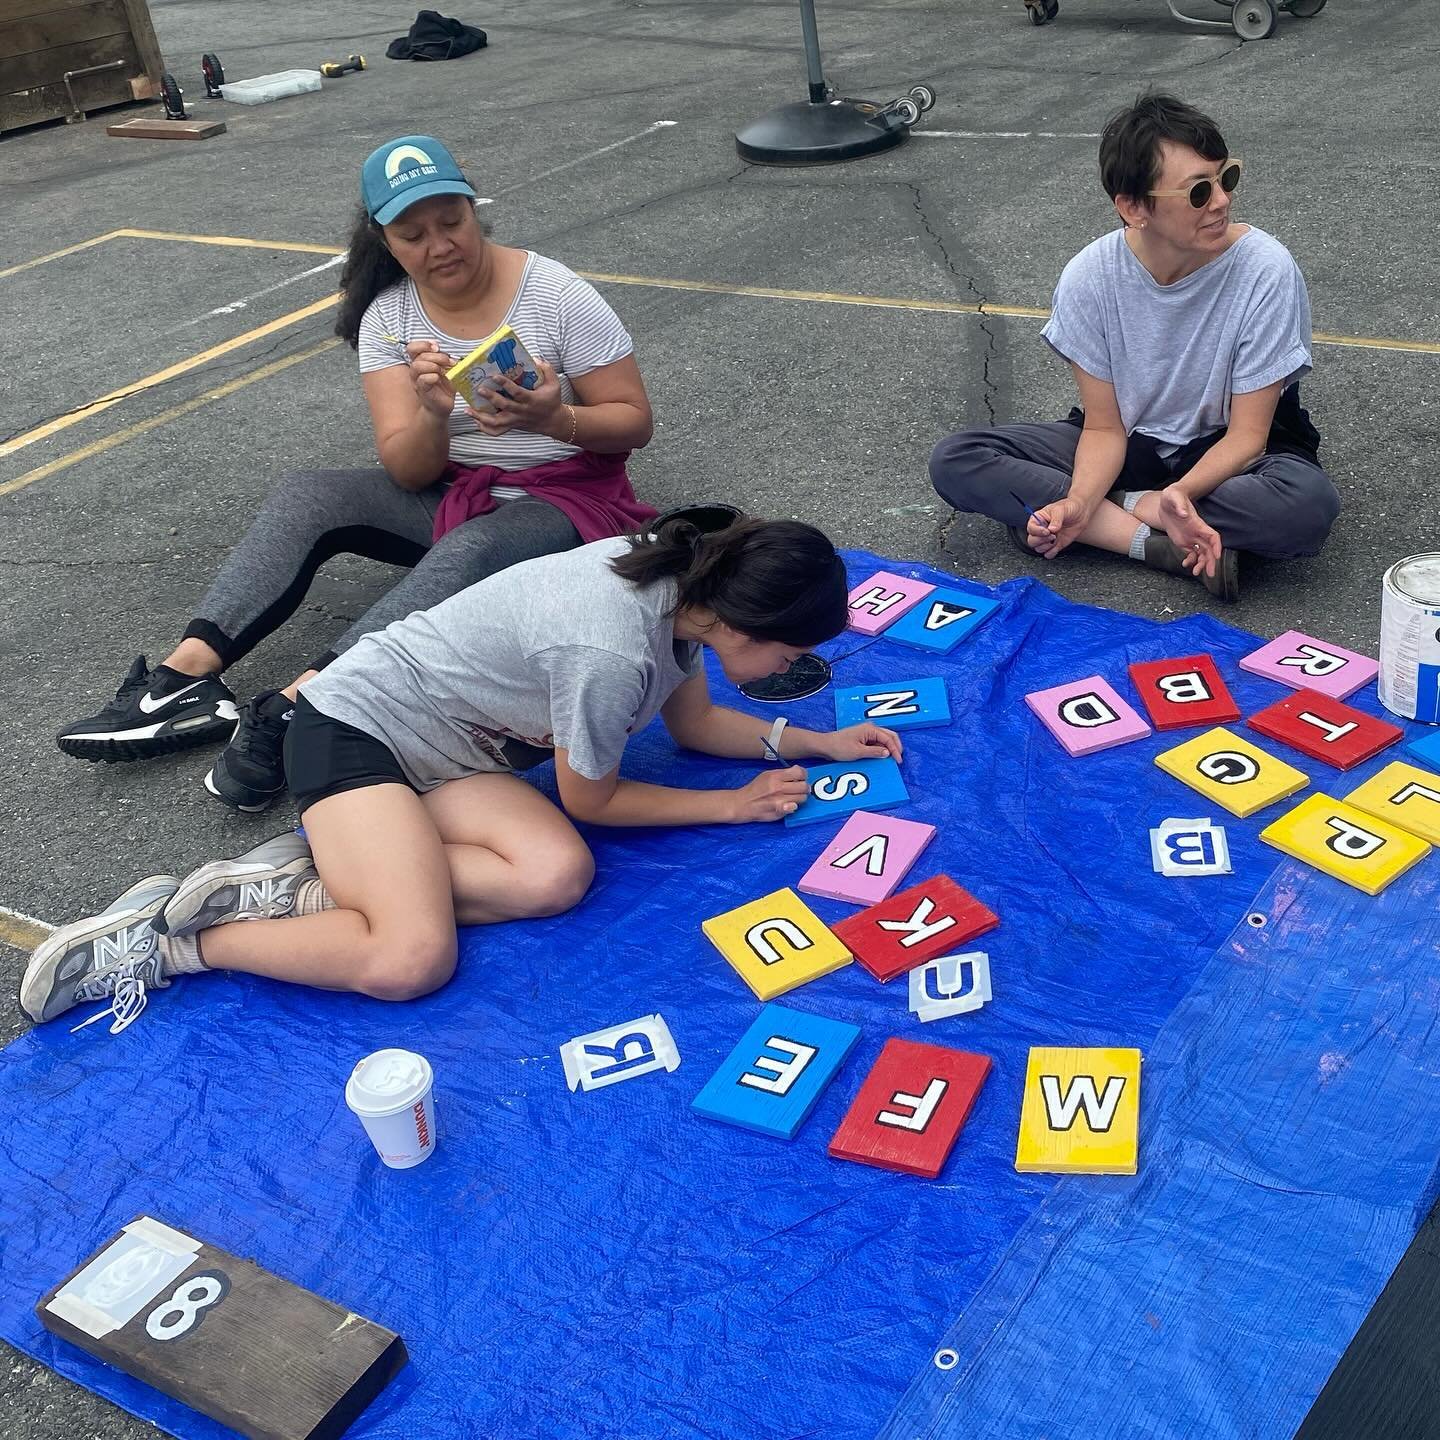 The Westland Fair doesn&rsquo;t just *happen.* It takes the work of many parents + guardians: designing, painting, planning, supporting, tie-dying, hammering, folding, cutting, collaborating, creating, lifting, rehearsing, announcing, leading, spread